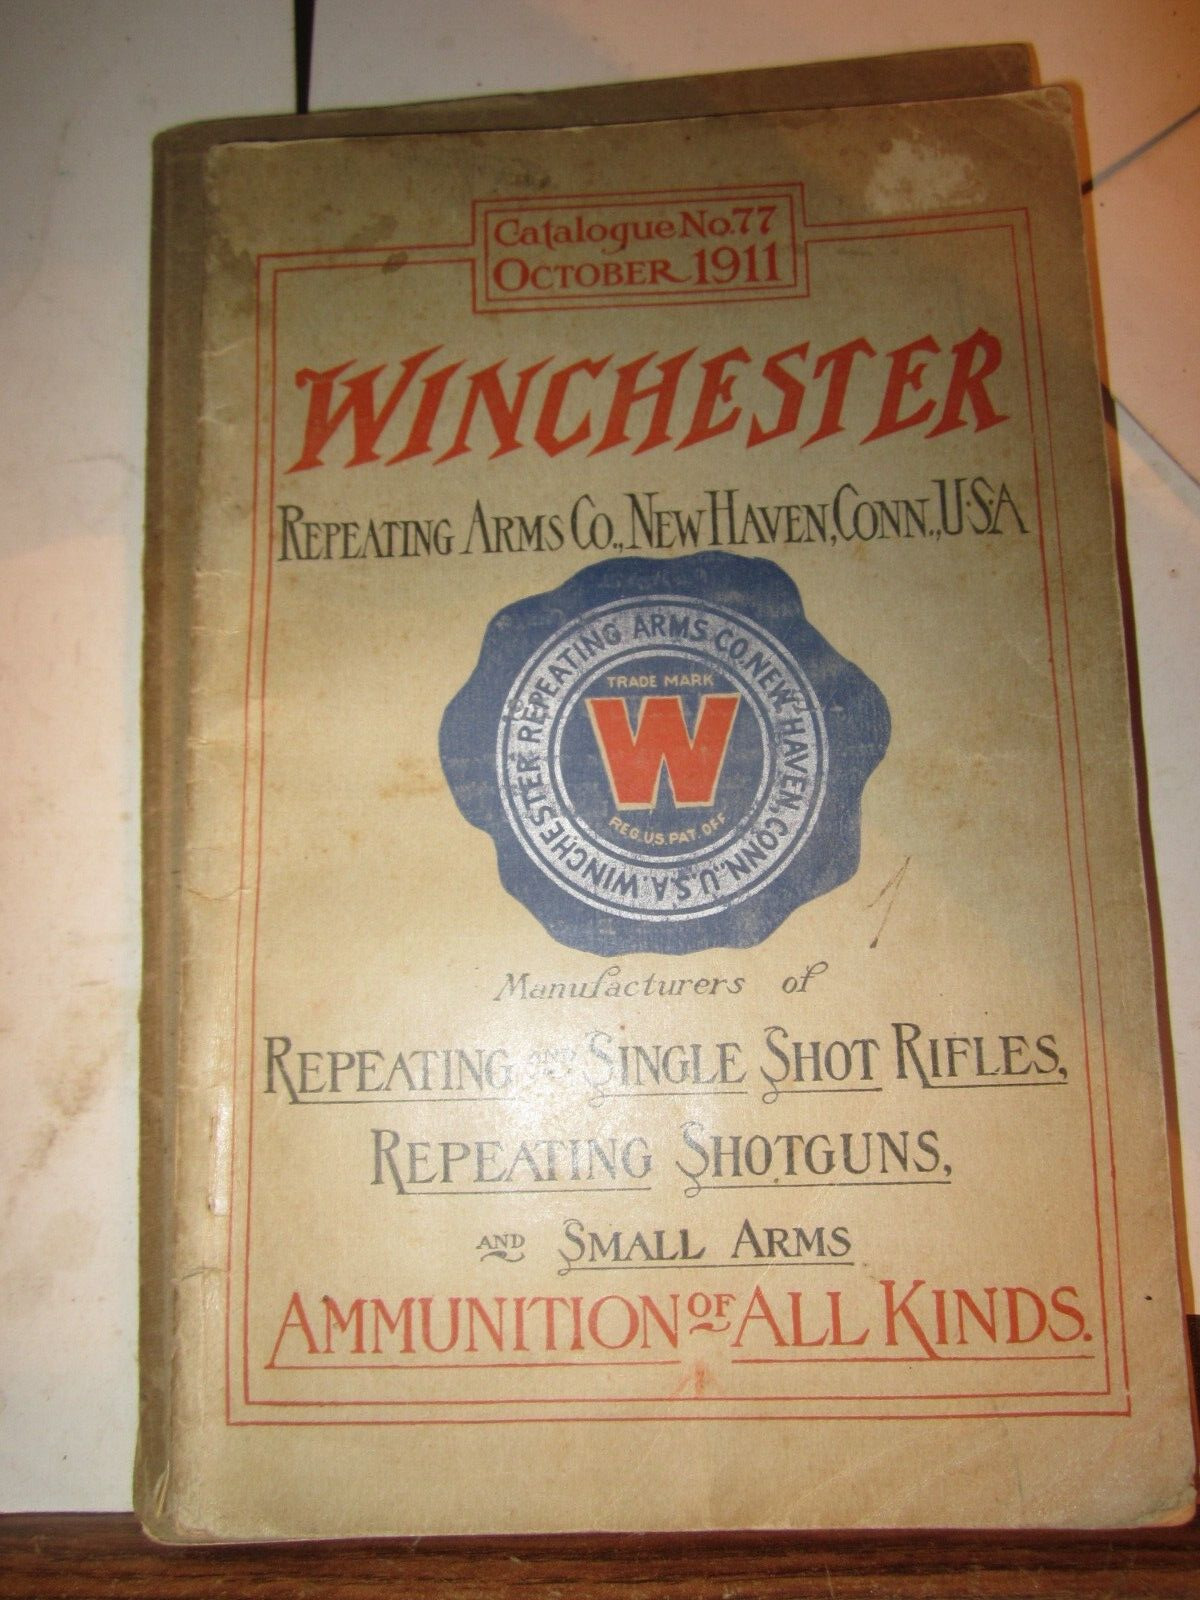 Winchester Repeating Arms October 1911 Rifle, Shotgun and Ammunition Catalog